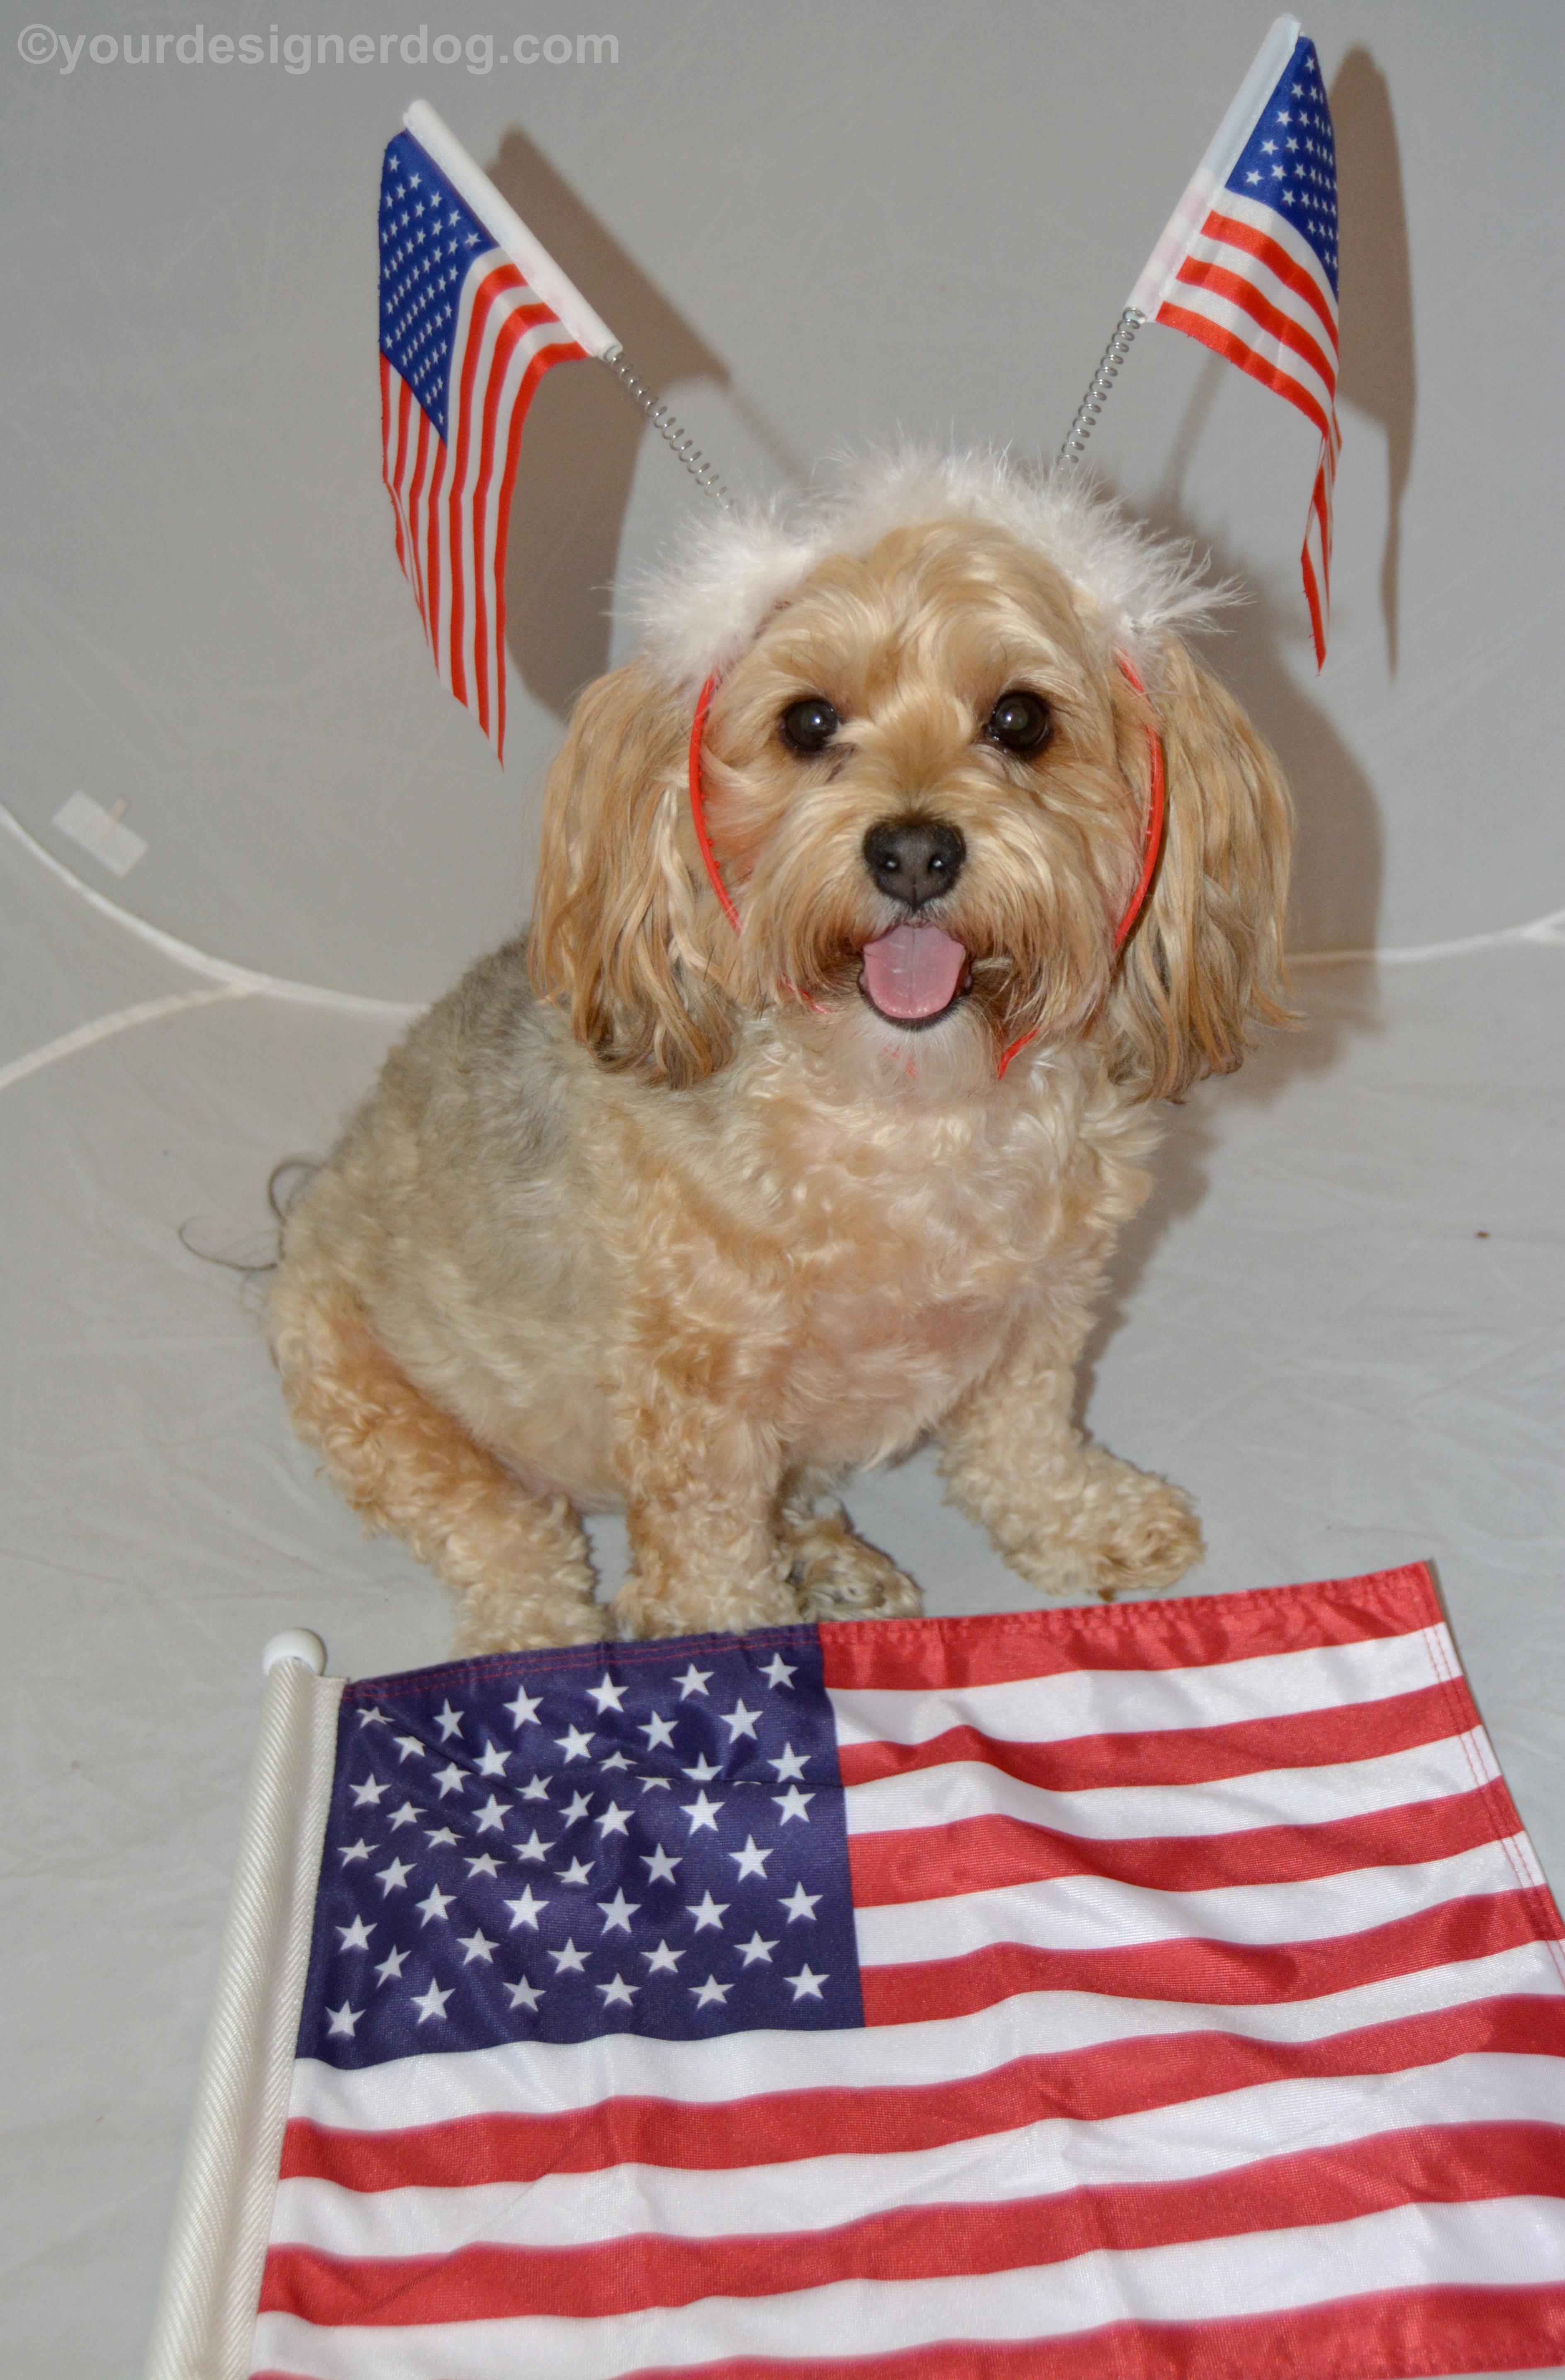 dogs, designer dogs, Yorkipoo, yorkie poo, flag, tongue out, america